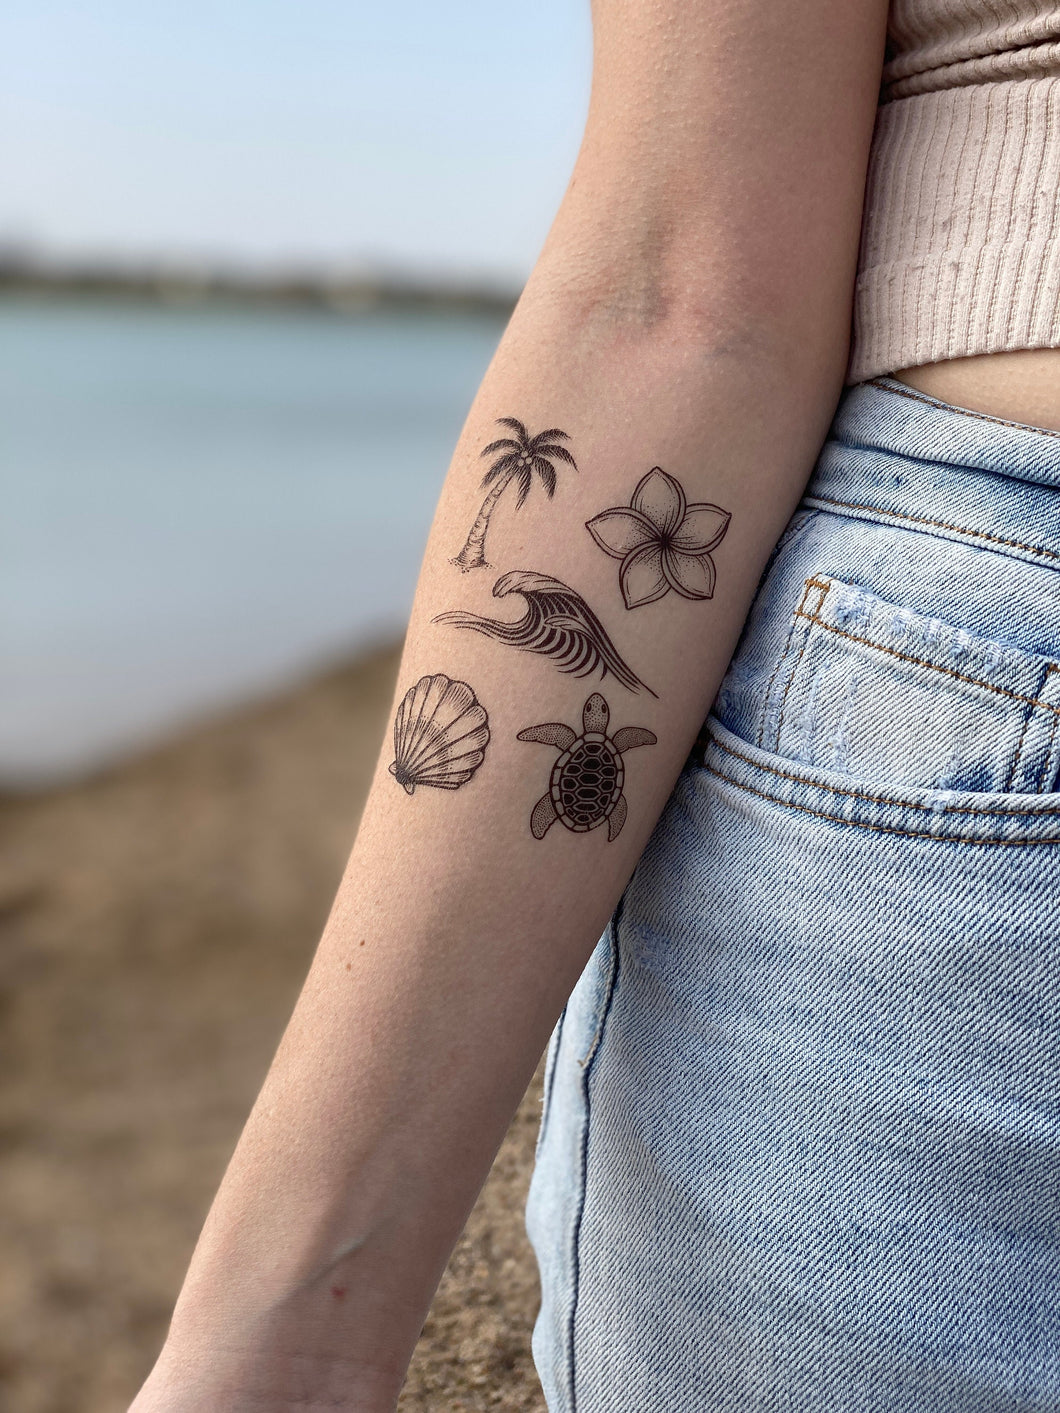 How to create a temporary tattoo - Times of India